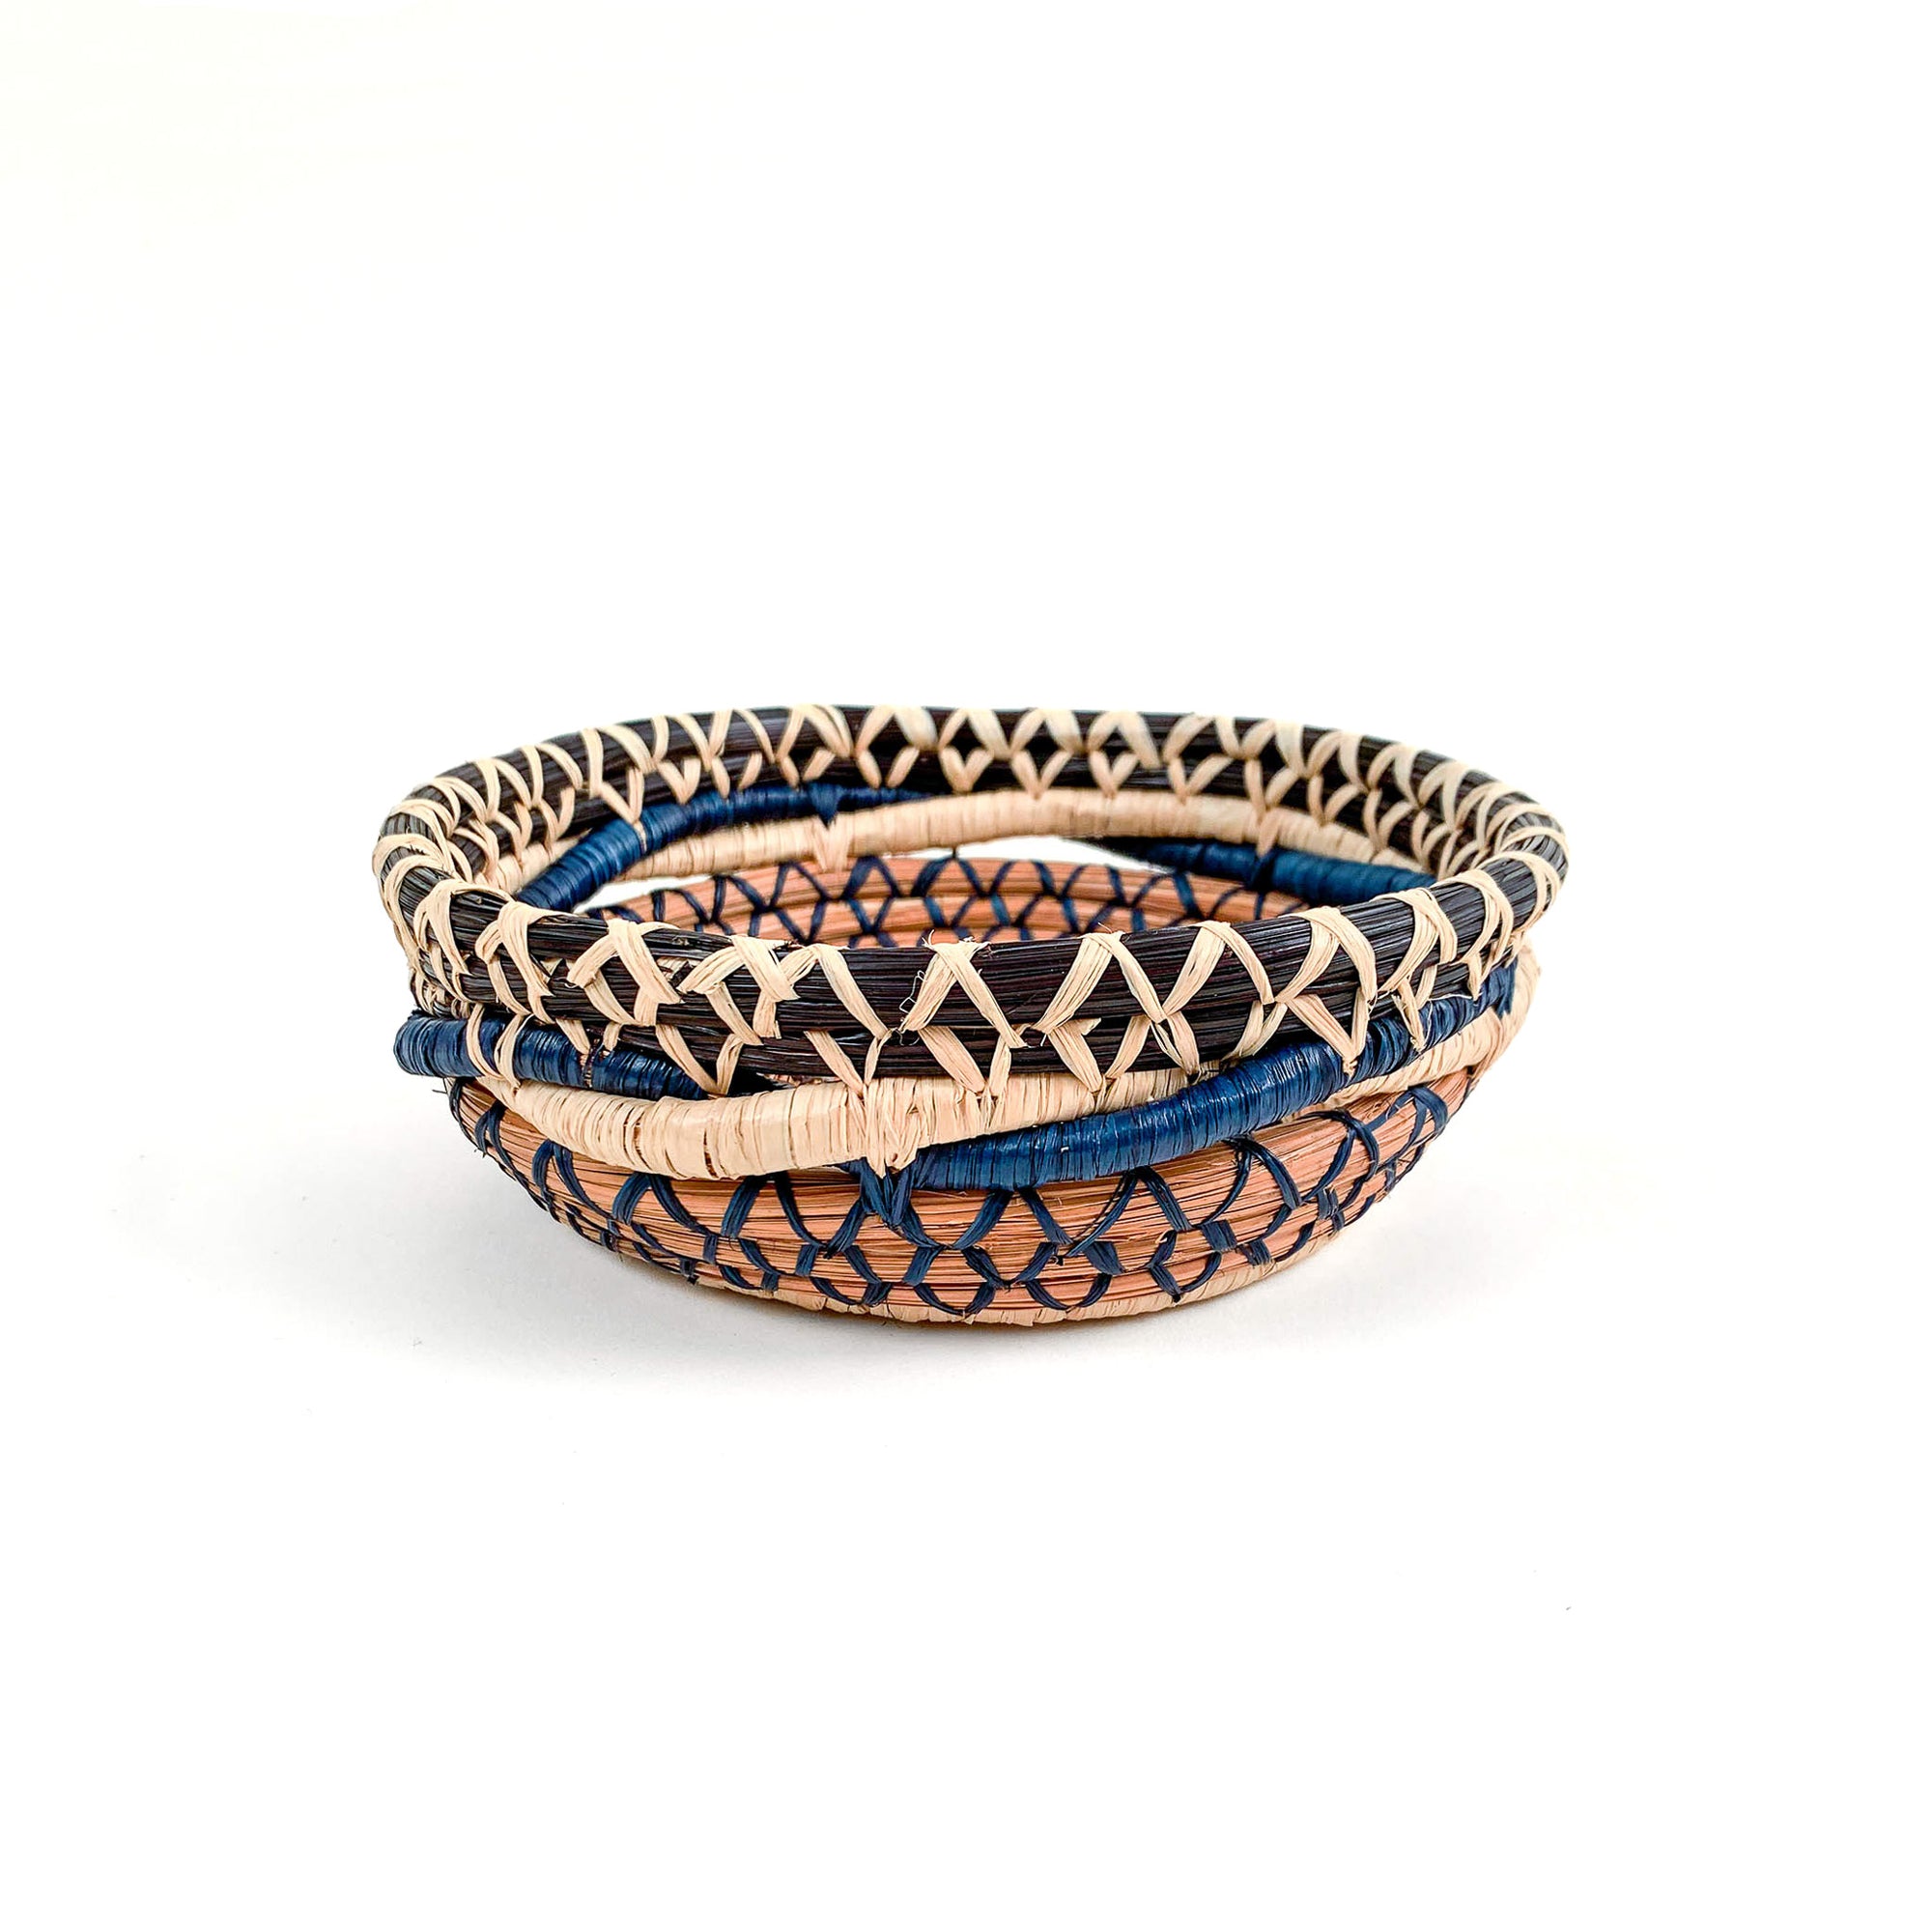 Pine needle basket with twining coils in browns and blue